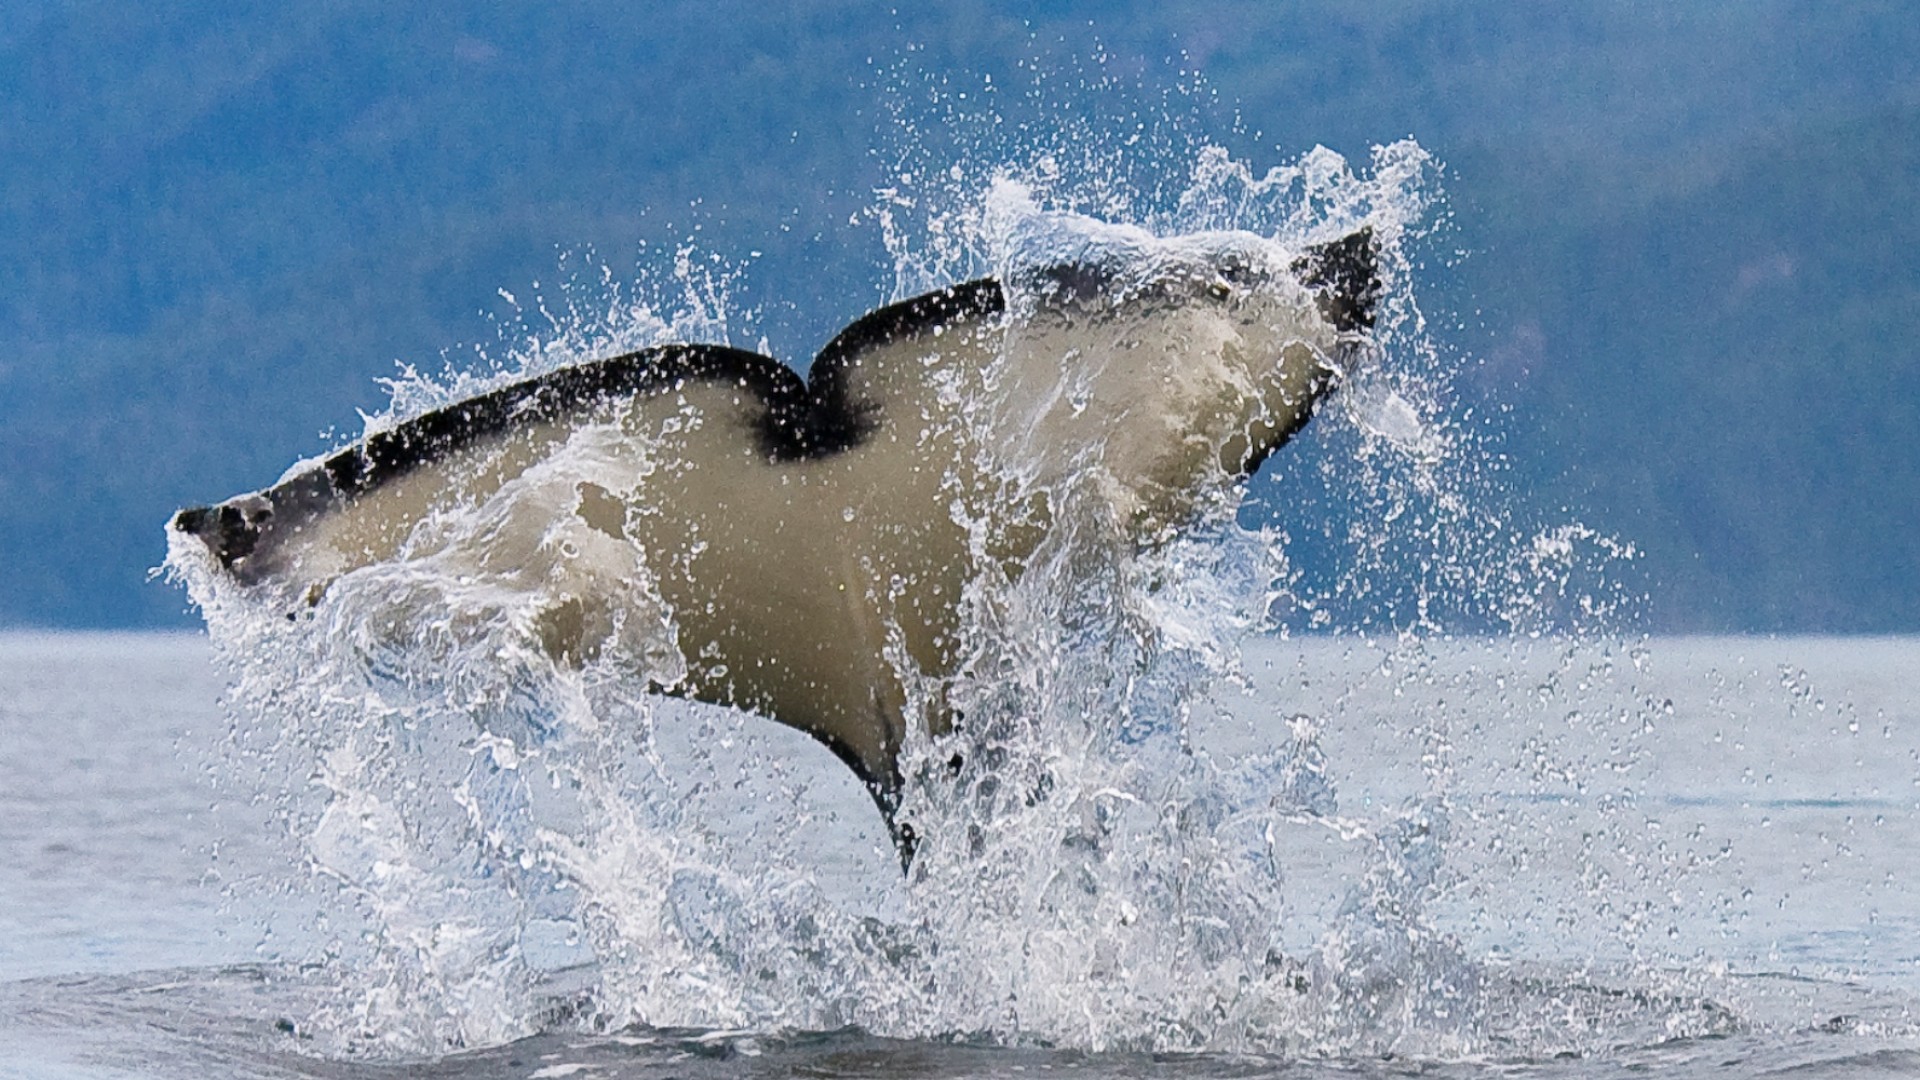 Large Orca whale tail out of the water slapping down creating a splash in the Pacific Ocean off the coast of Vancouver Island